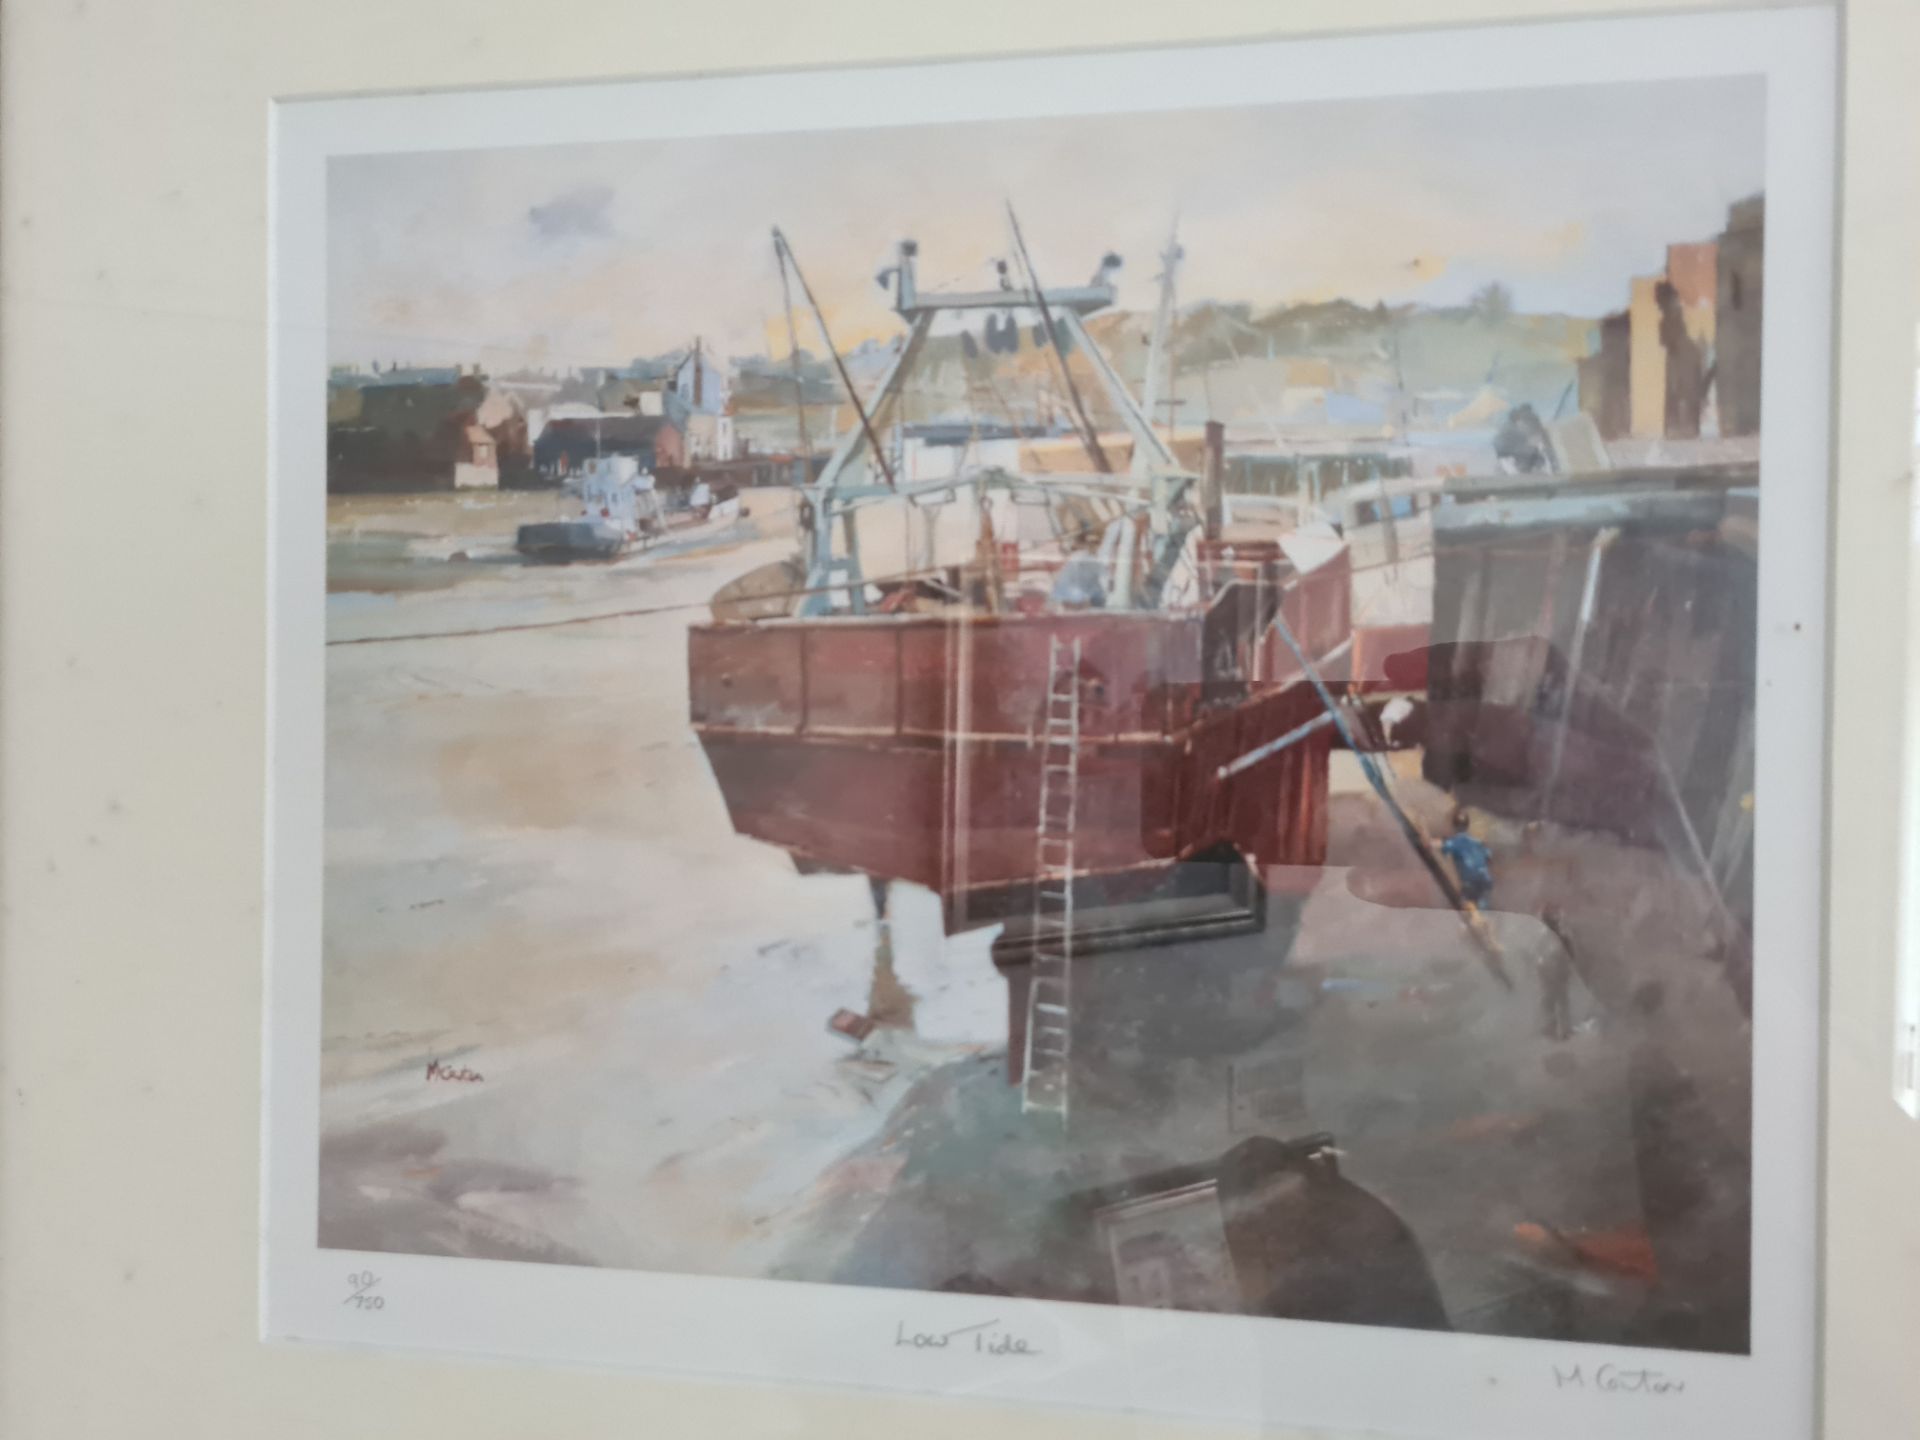 Signed Titled Framed Limited Edition Print ' Low Tide' (9/750), by M Cowton, 20" x 18" - Image 2 of 5